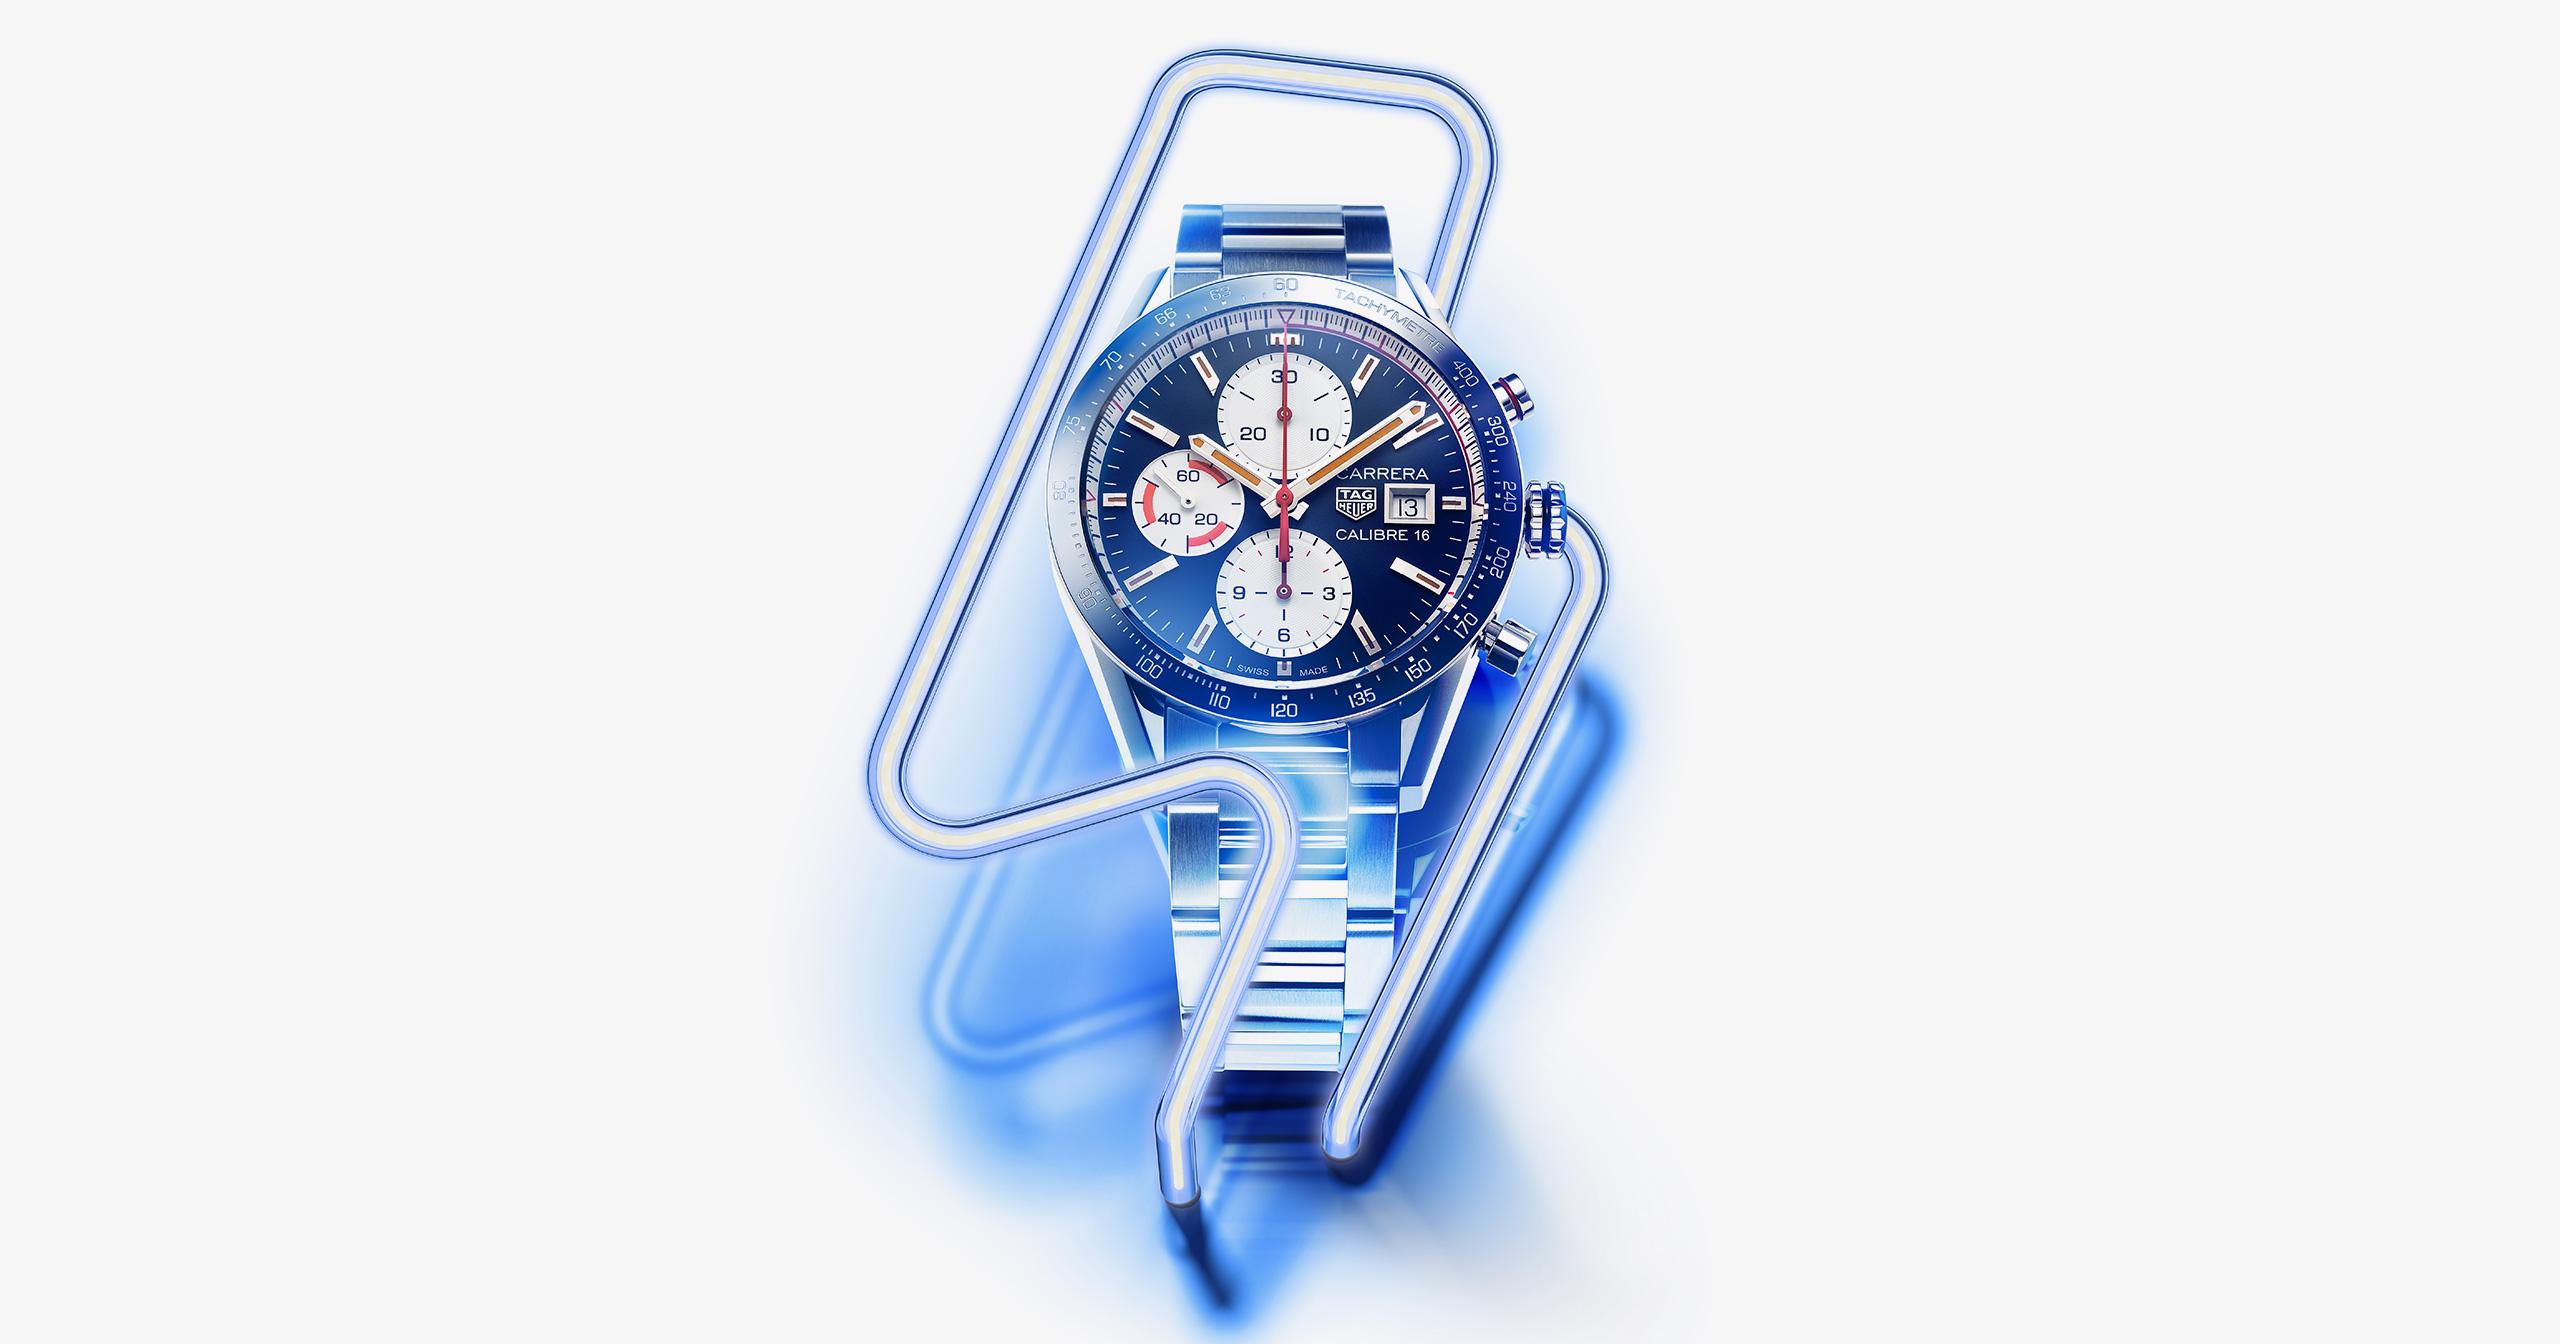 Carrera Watch under neon light effects, showcasing 3D/CGI services in magazine cover product visualisation